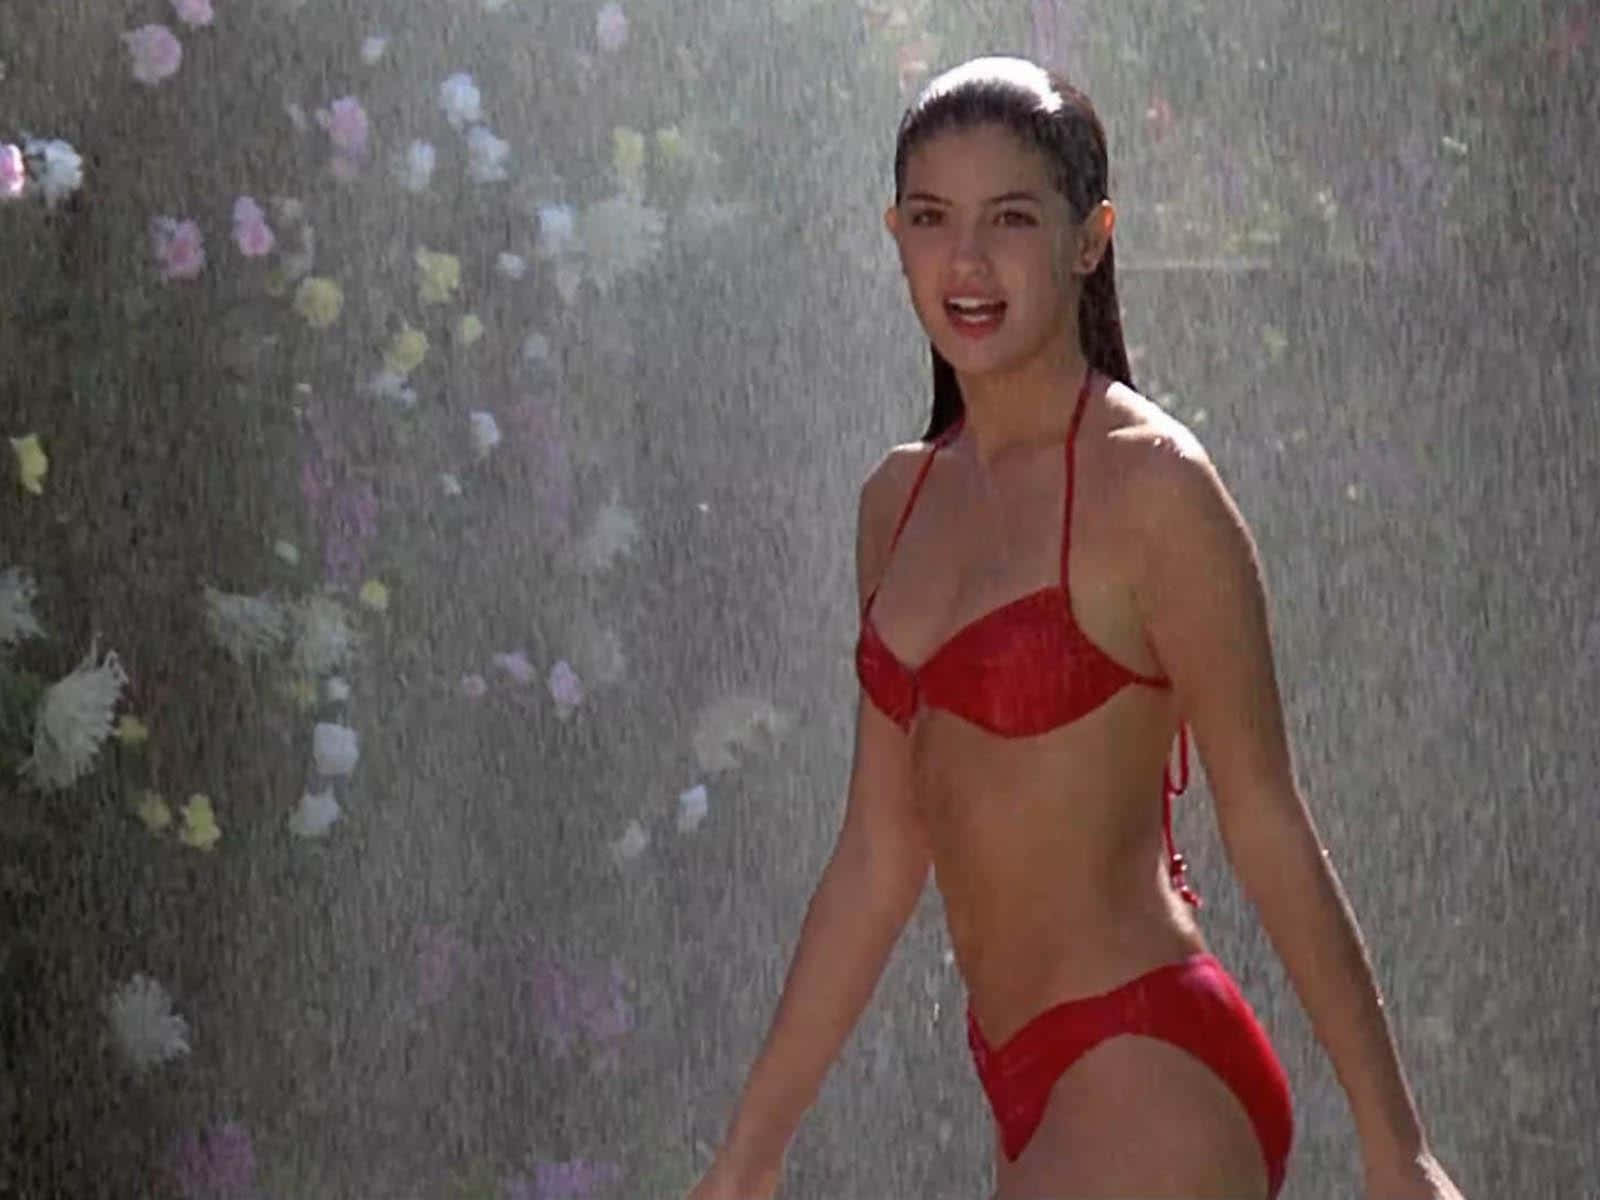 Phoebe Cates enjoys a moment of leisure during an outdoor photoshoot. Wallpaper